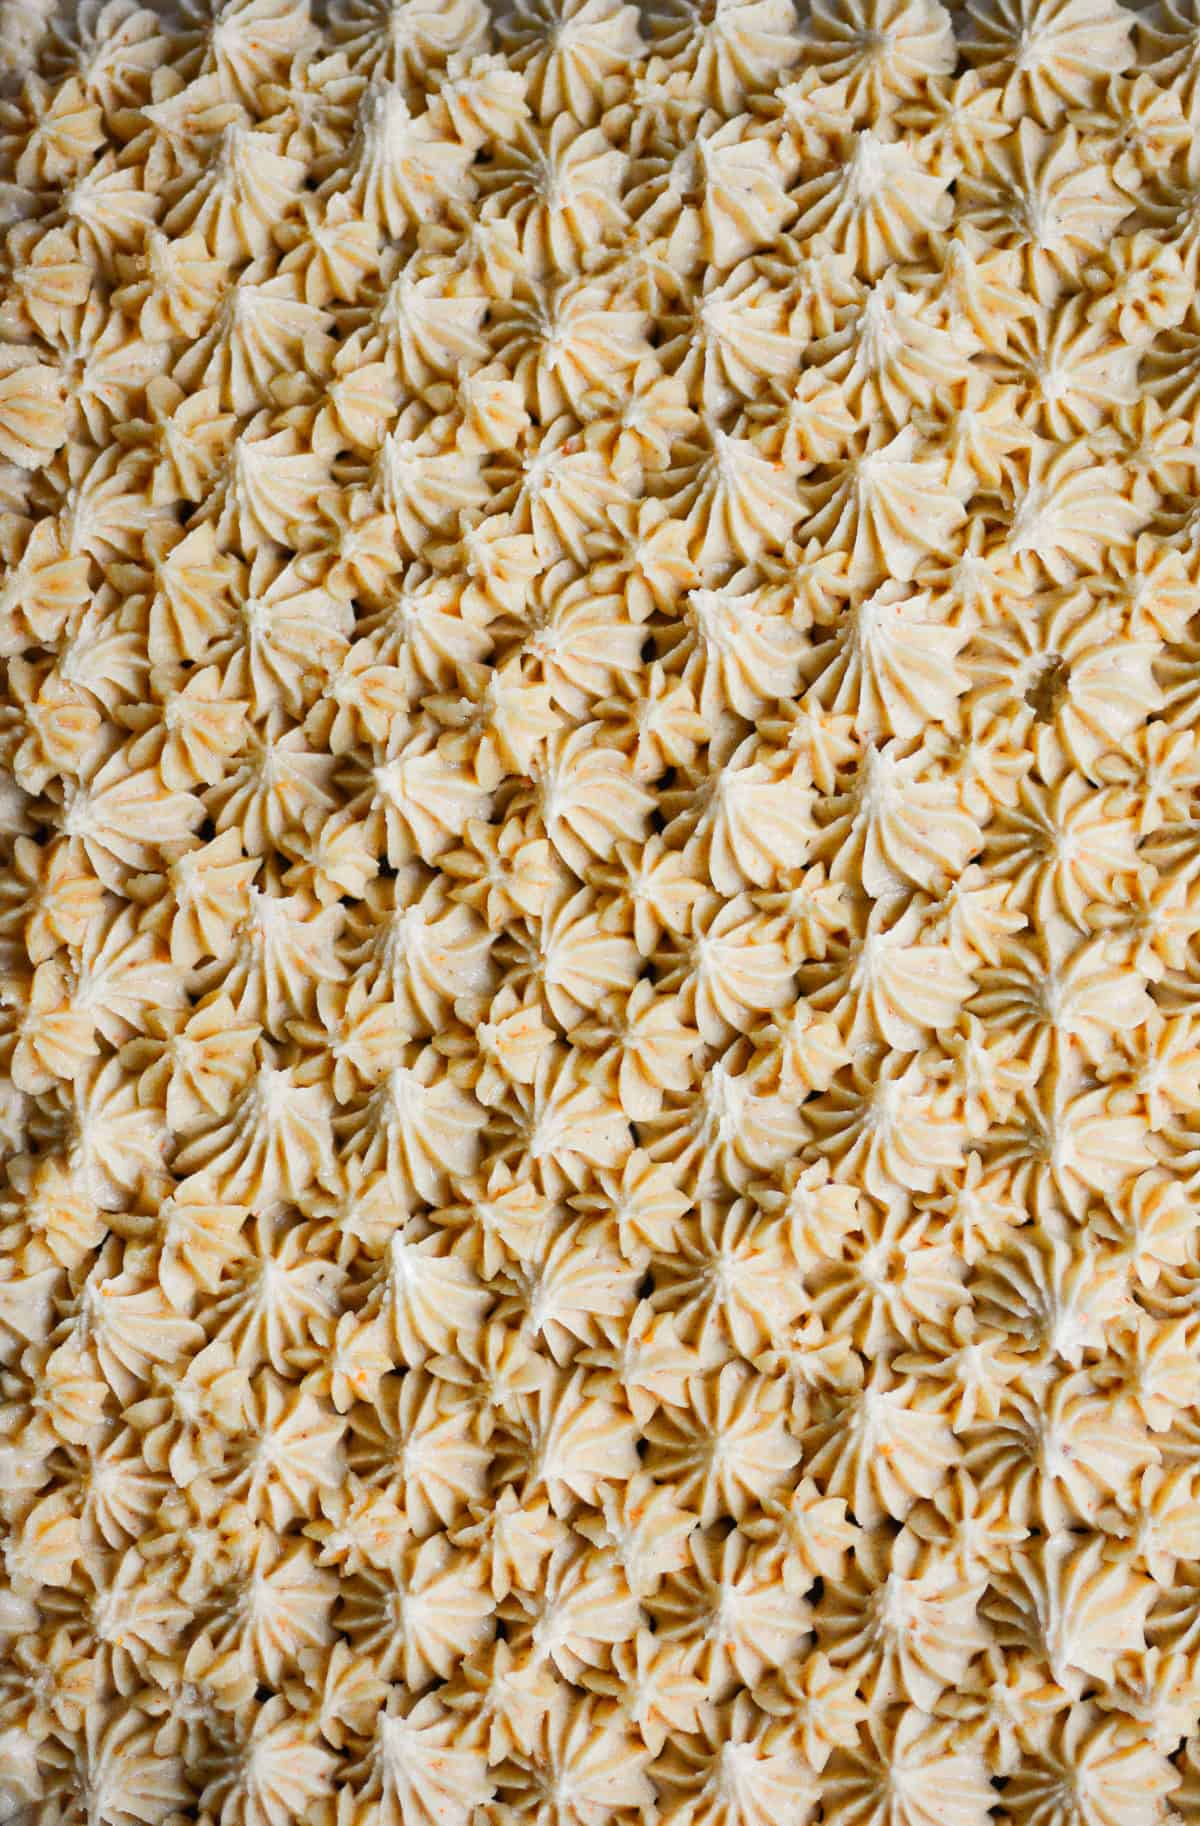 Close up of piped Vegan Peanut Butter Frosting.